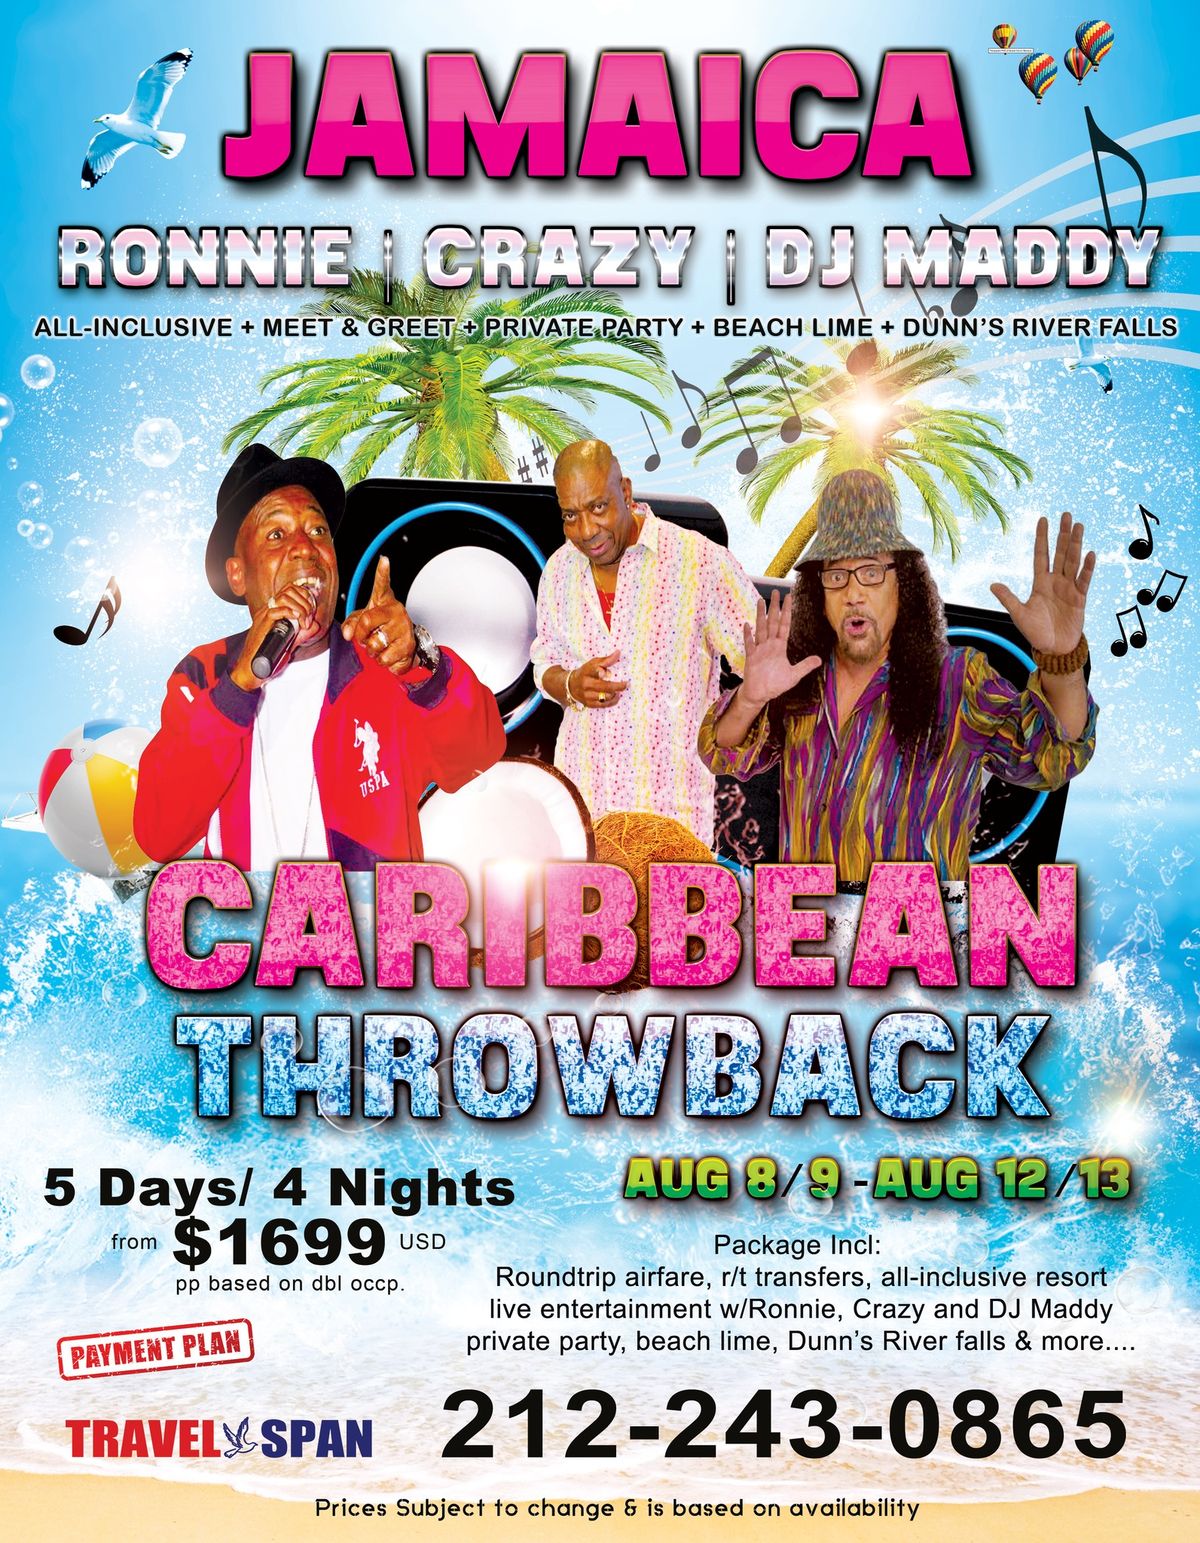 ALL-INCLUSIVE Caribbean Vacation & Throwback Event